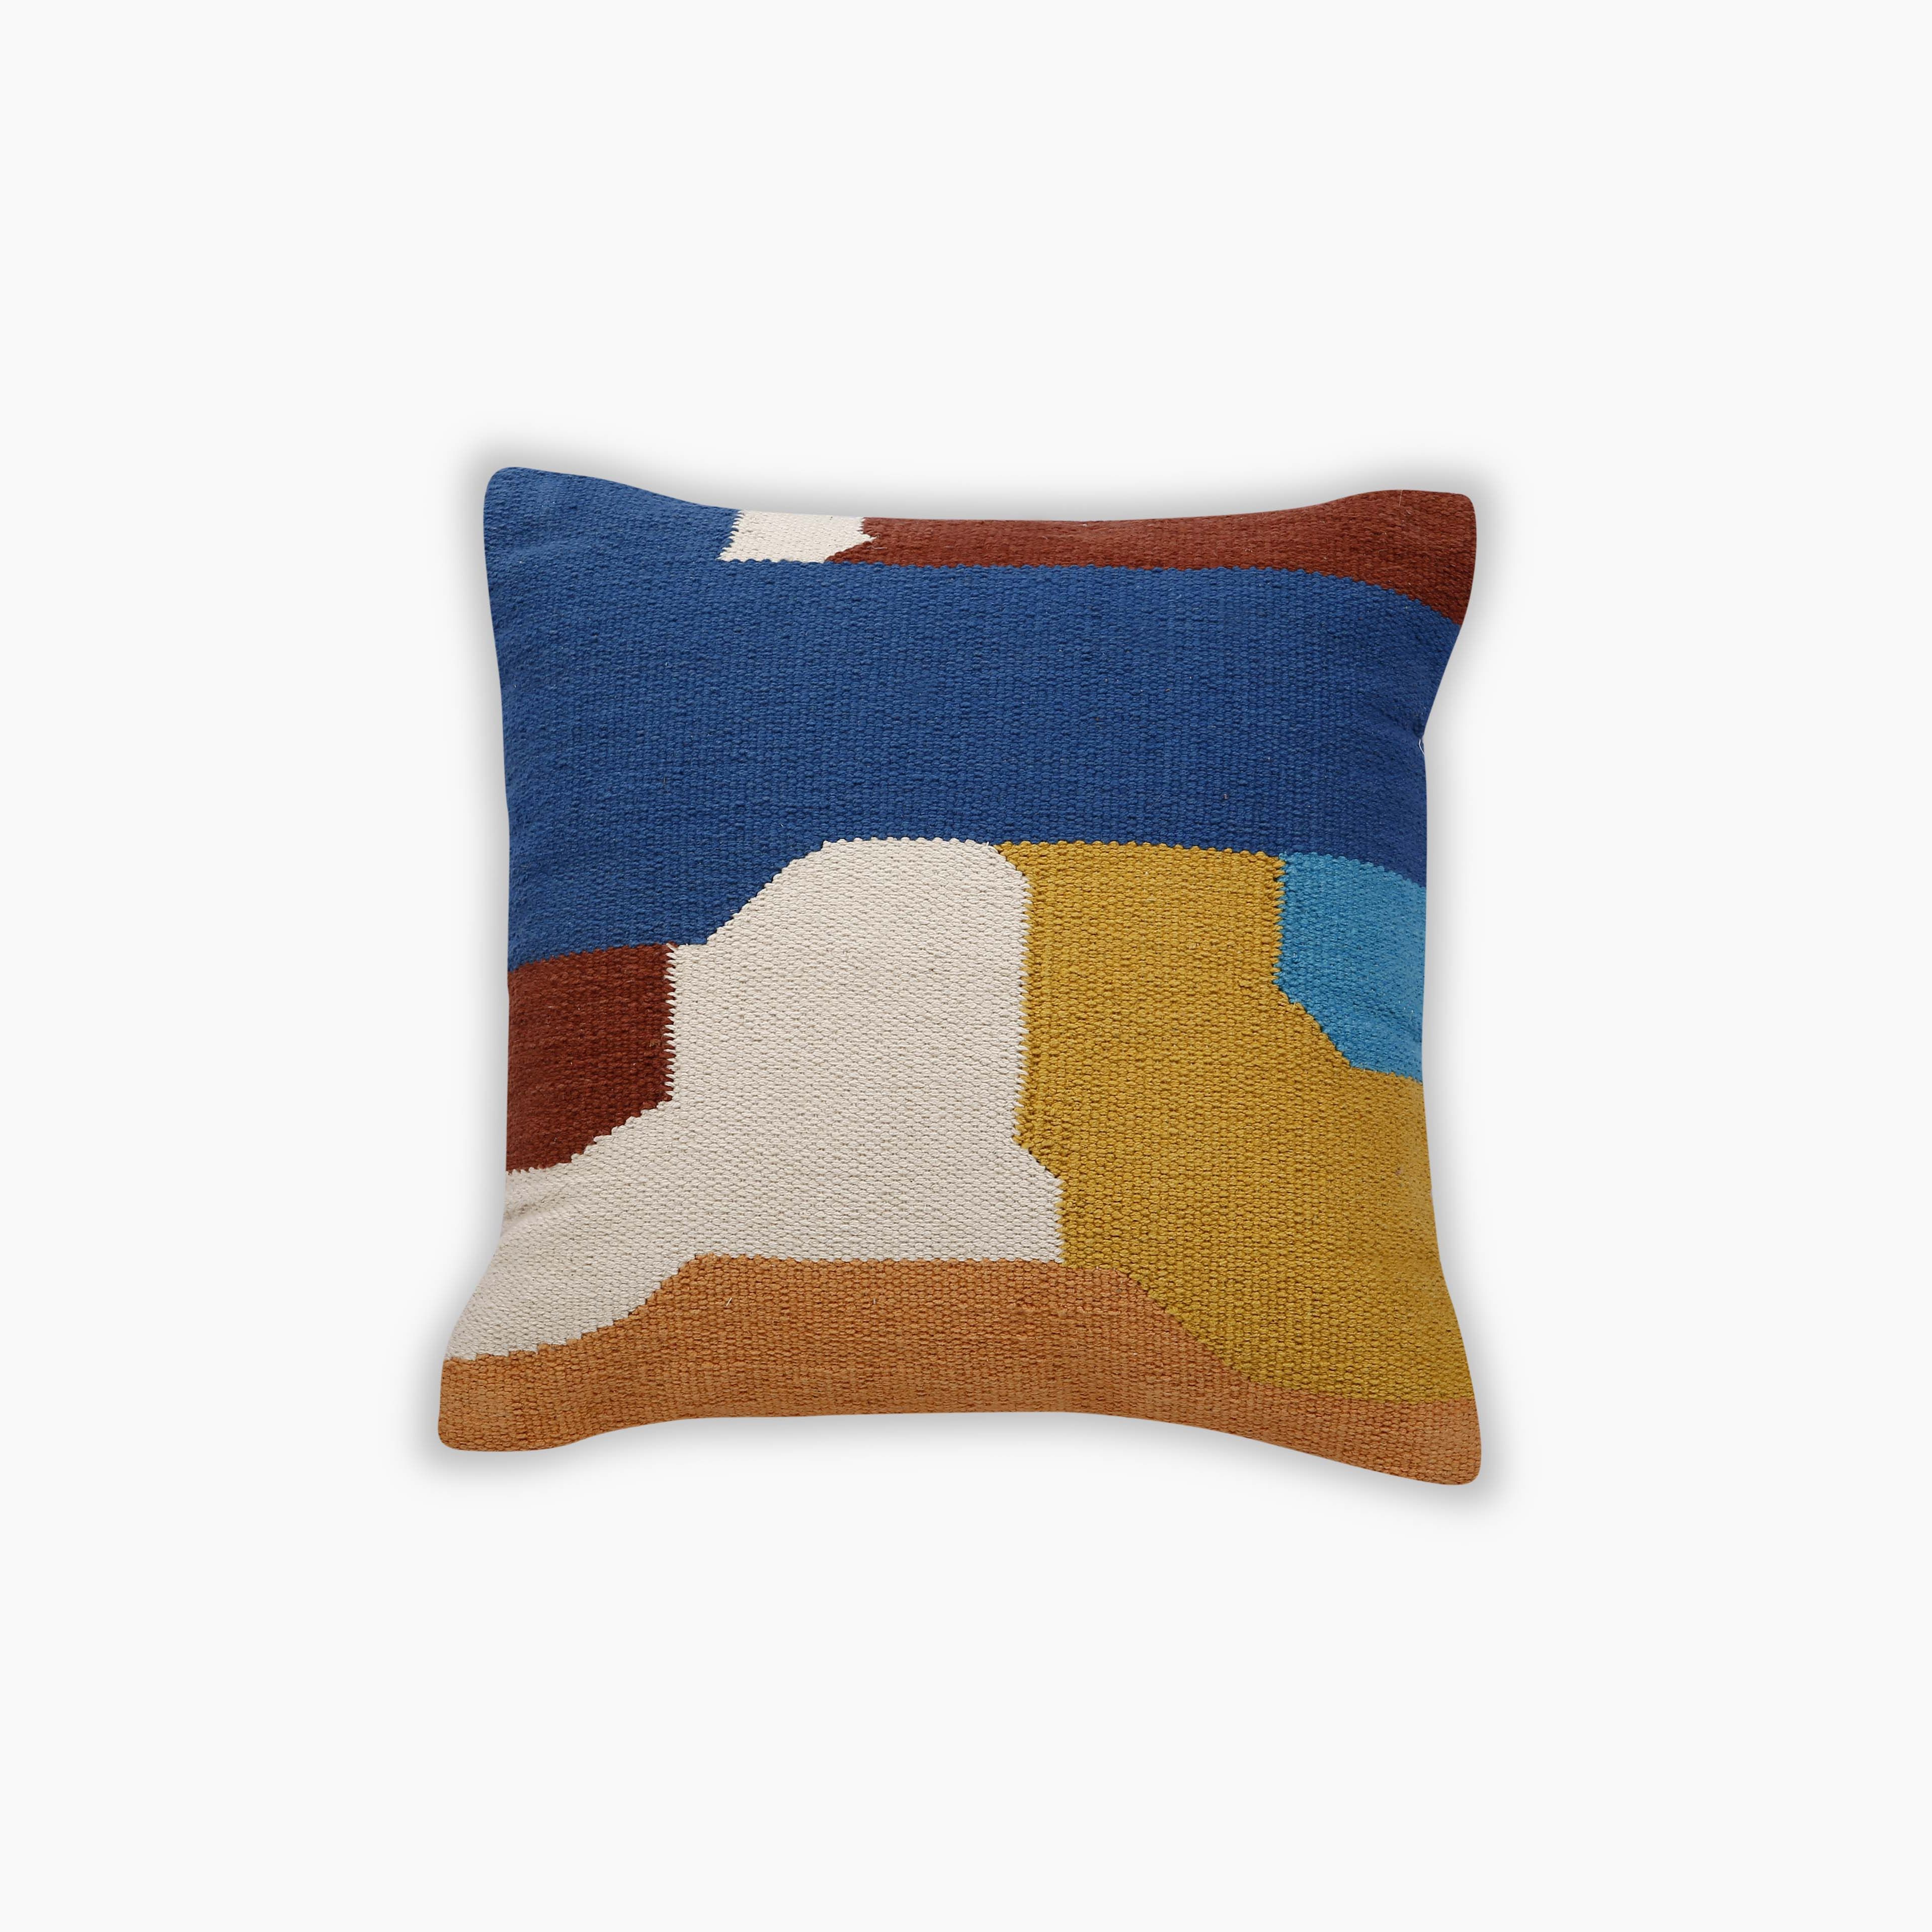 Ladakh Handcrafted Throw Pillow, Multi- 18x18 inch